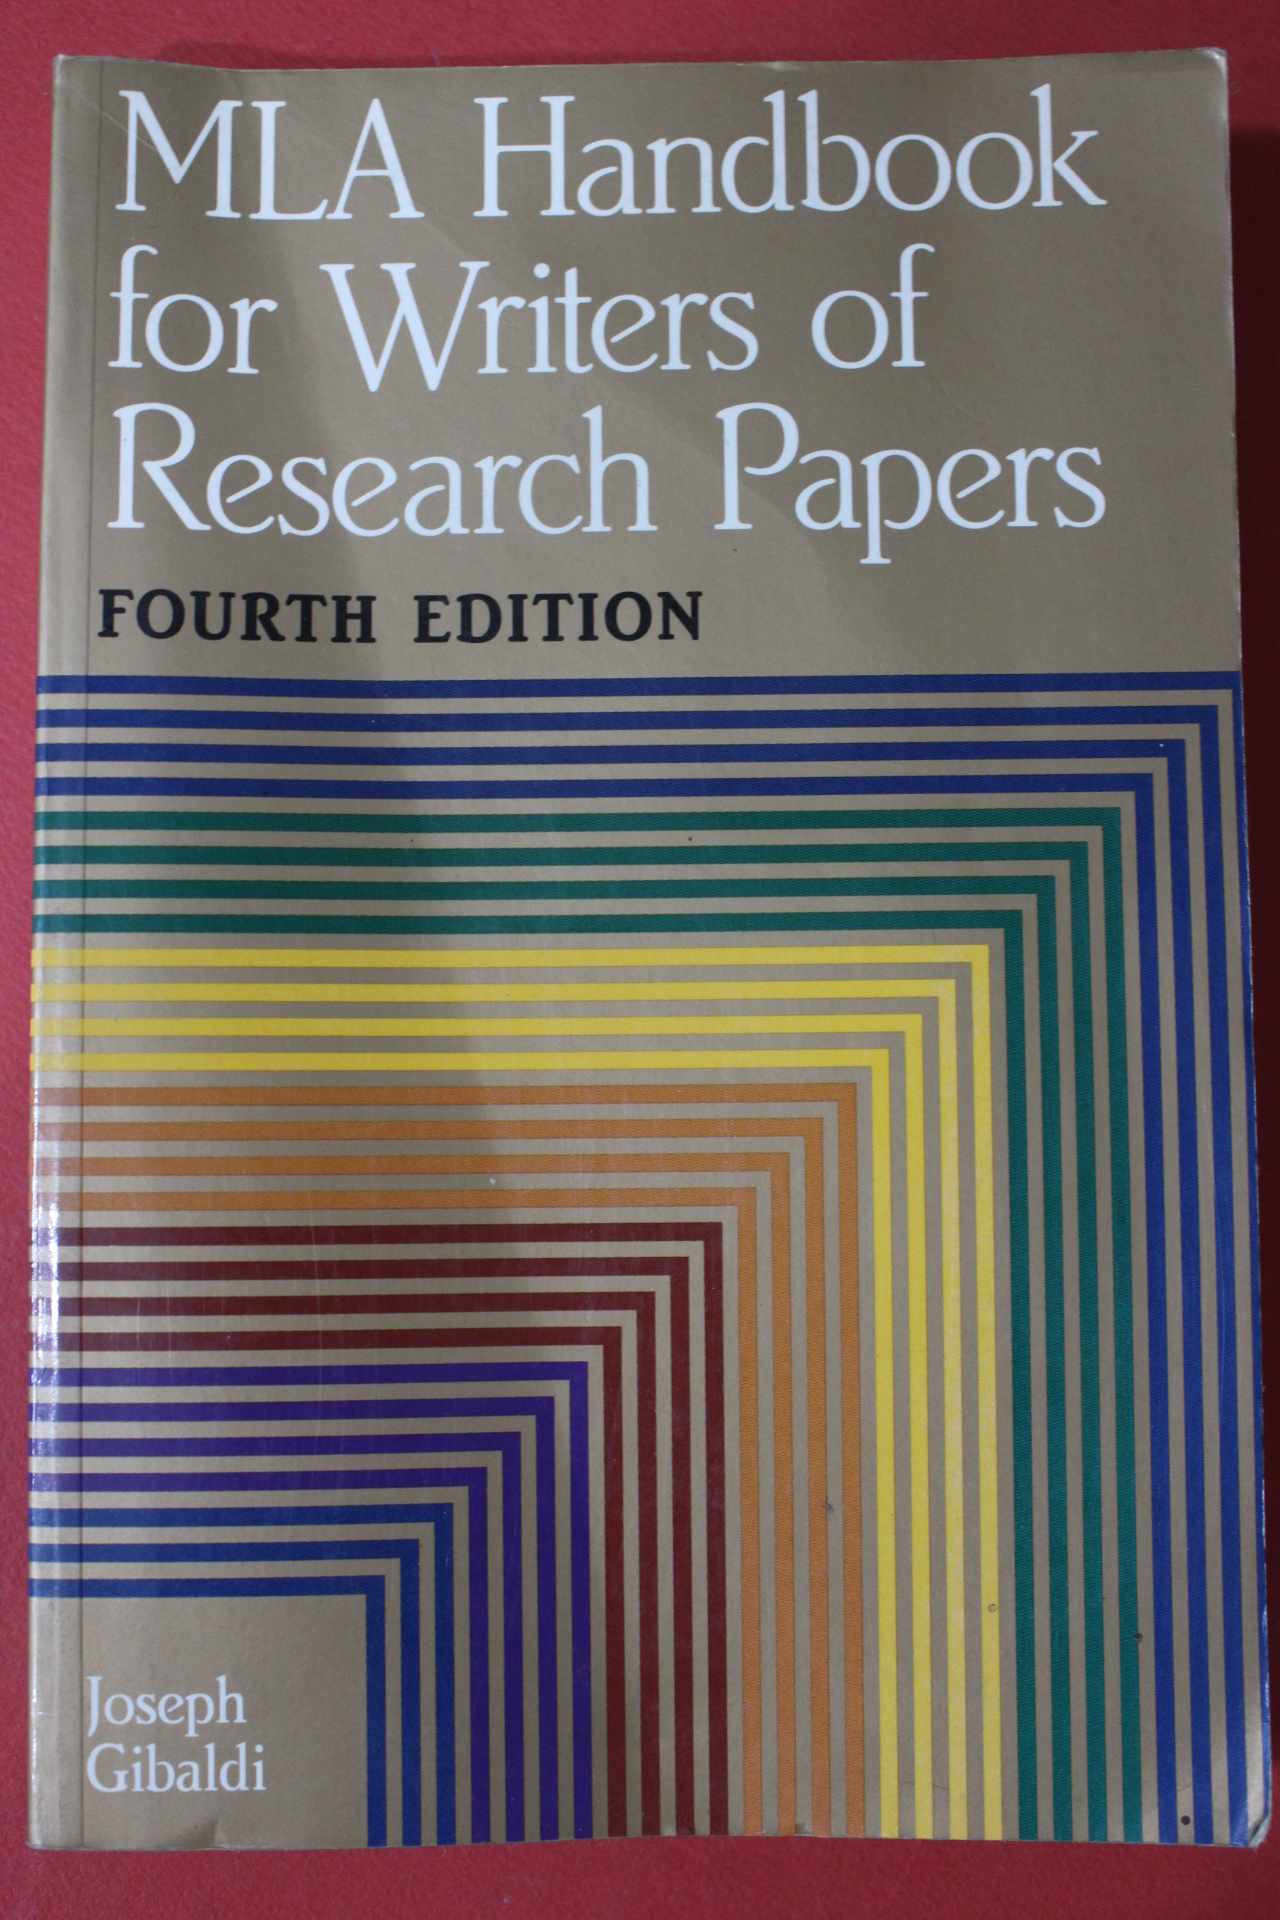 mla handbook for writers of research papers 4th edition